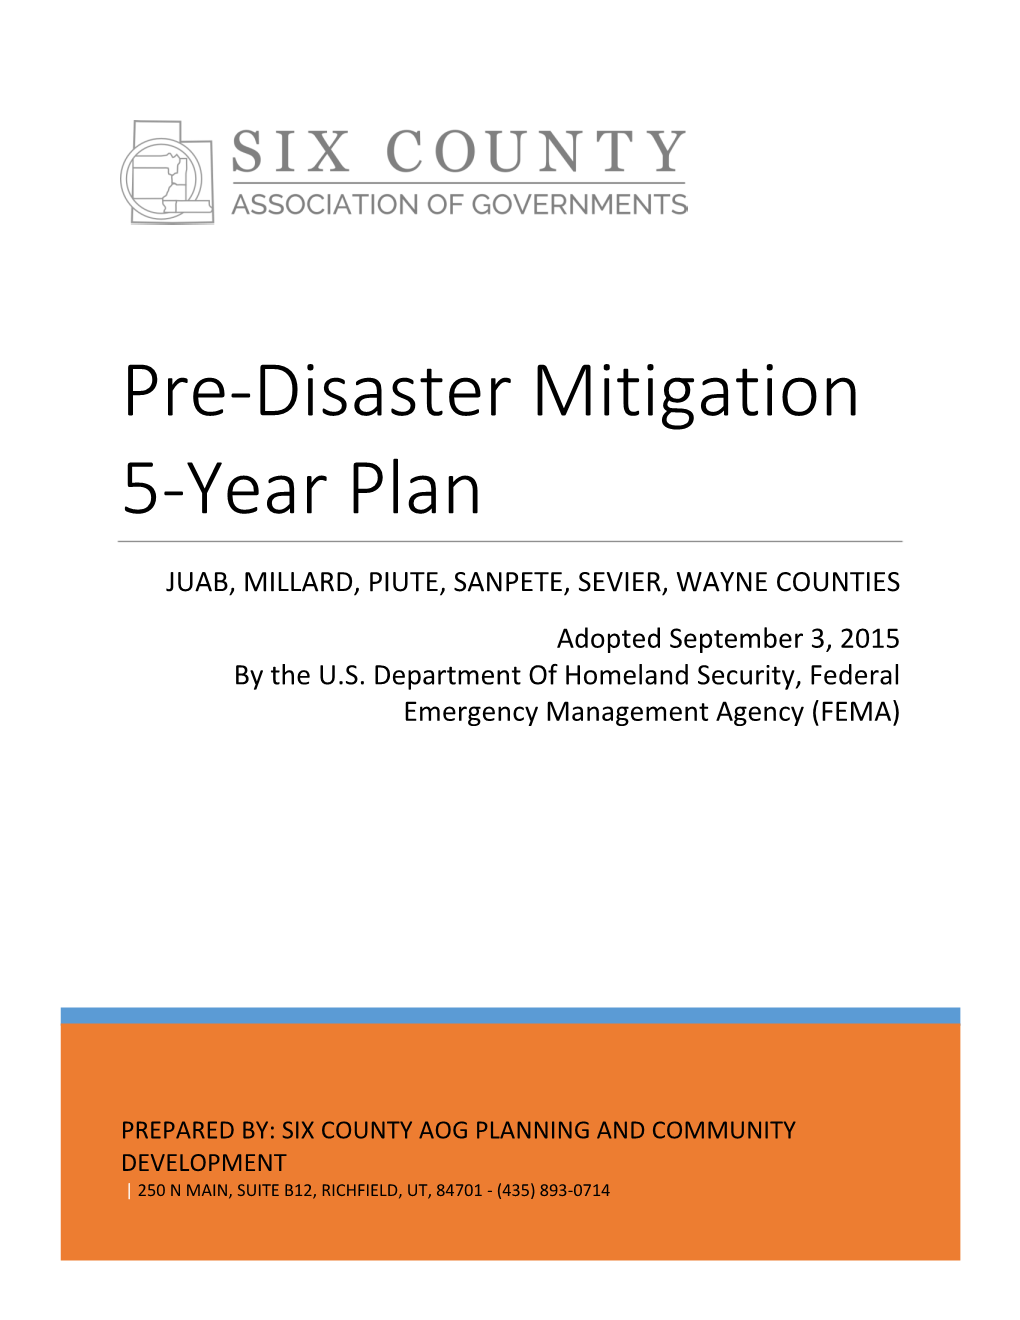 Pre-Disaster Mitigation Plan Update Is to Substantially and Permanently Reduce Vulnerability to Natural Hazards for the Communities Within the SCAOG